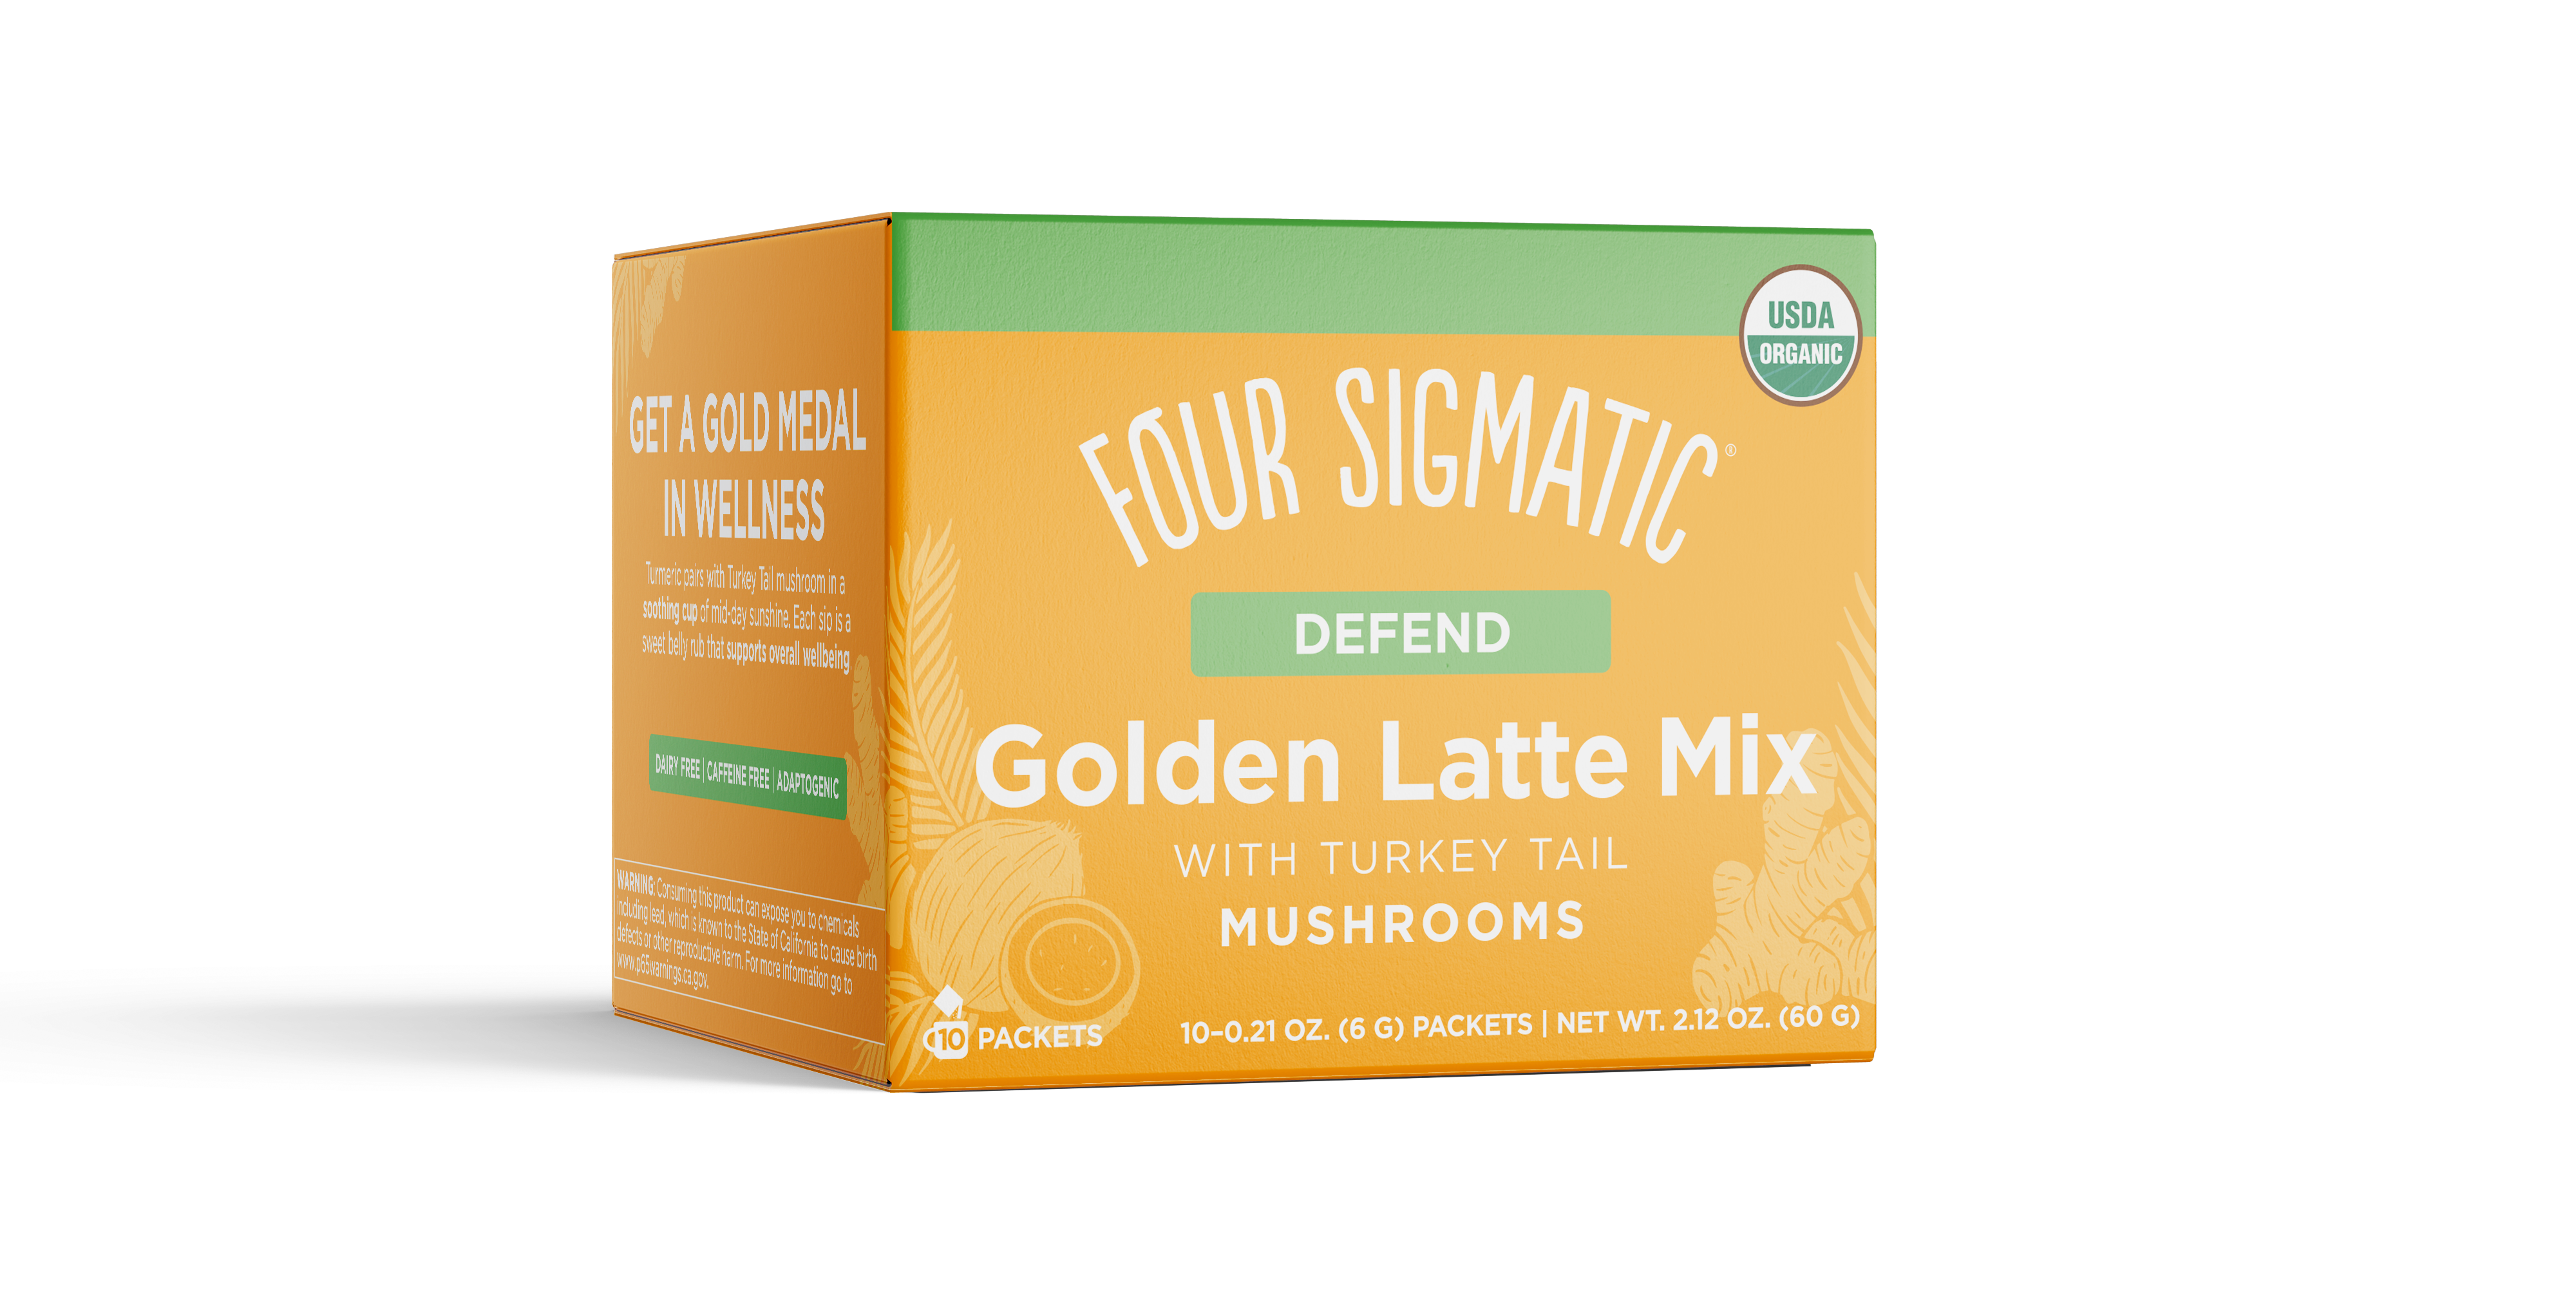 Four Sigmatic Golden Latte with Turkey Tail 10ct Box 144 units per case 2.2 oz